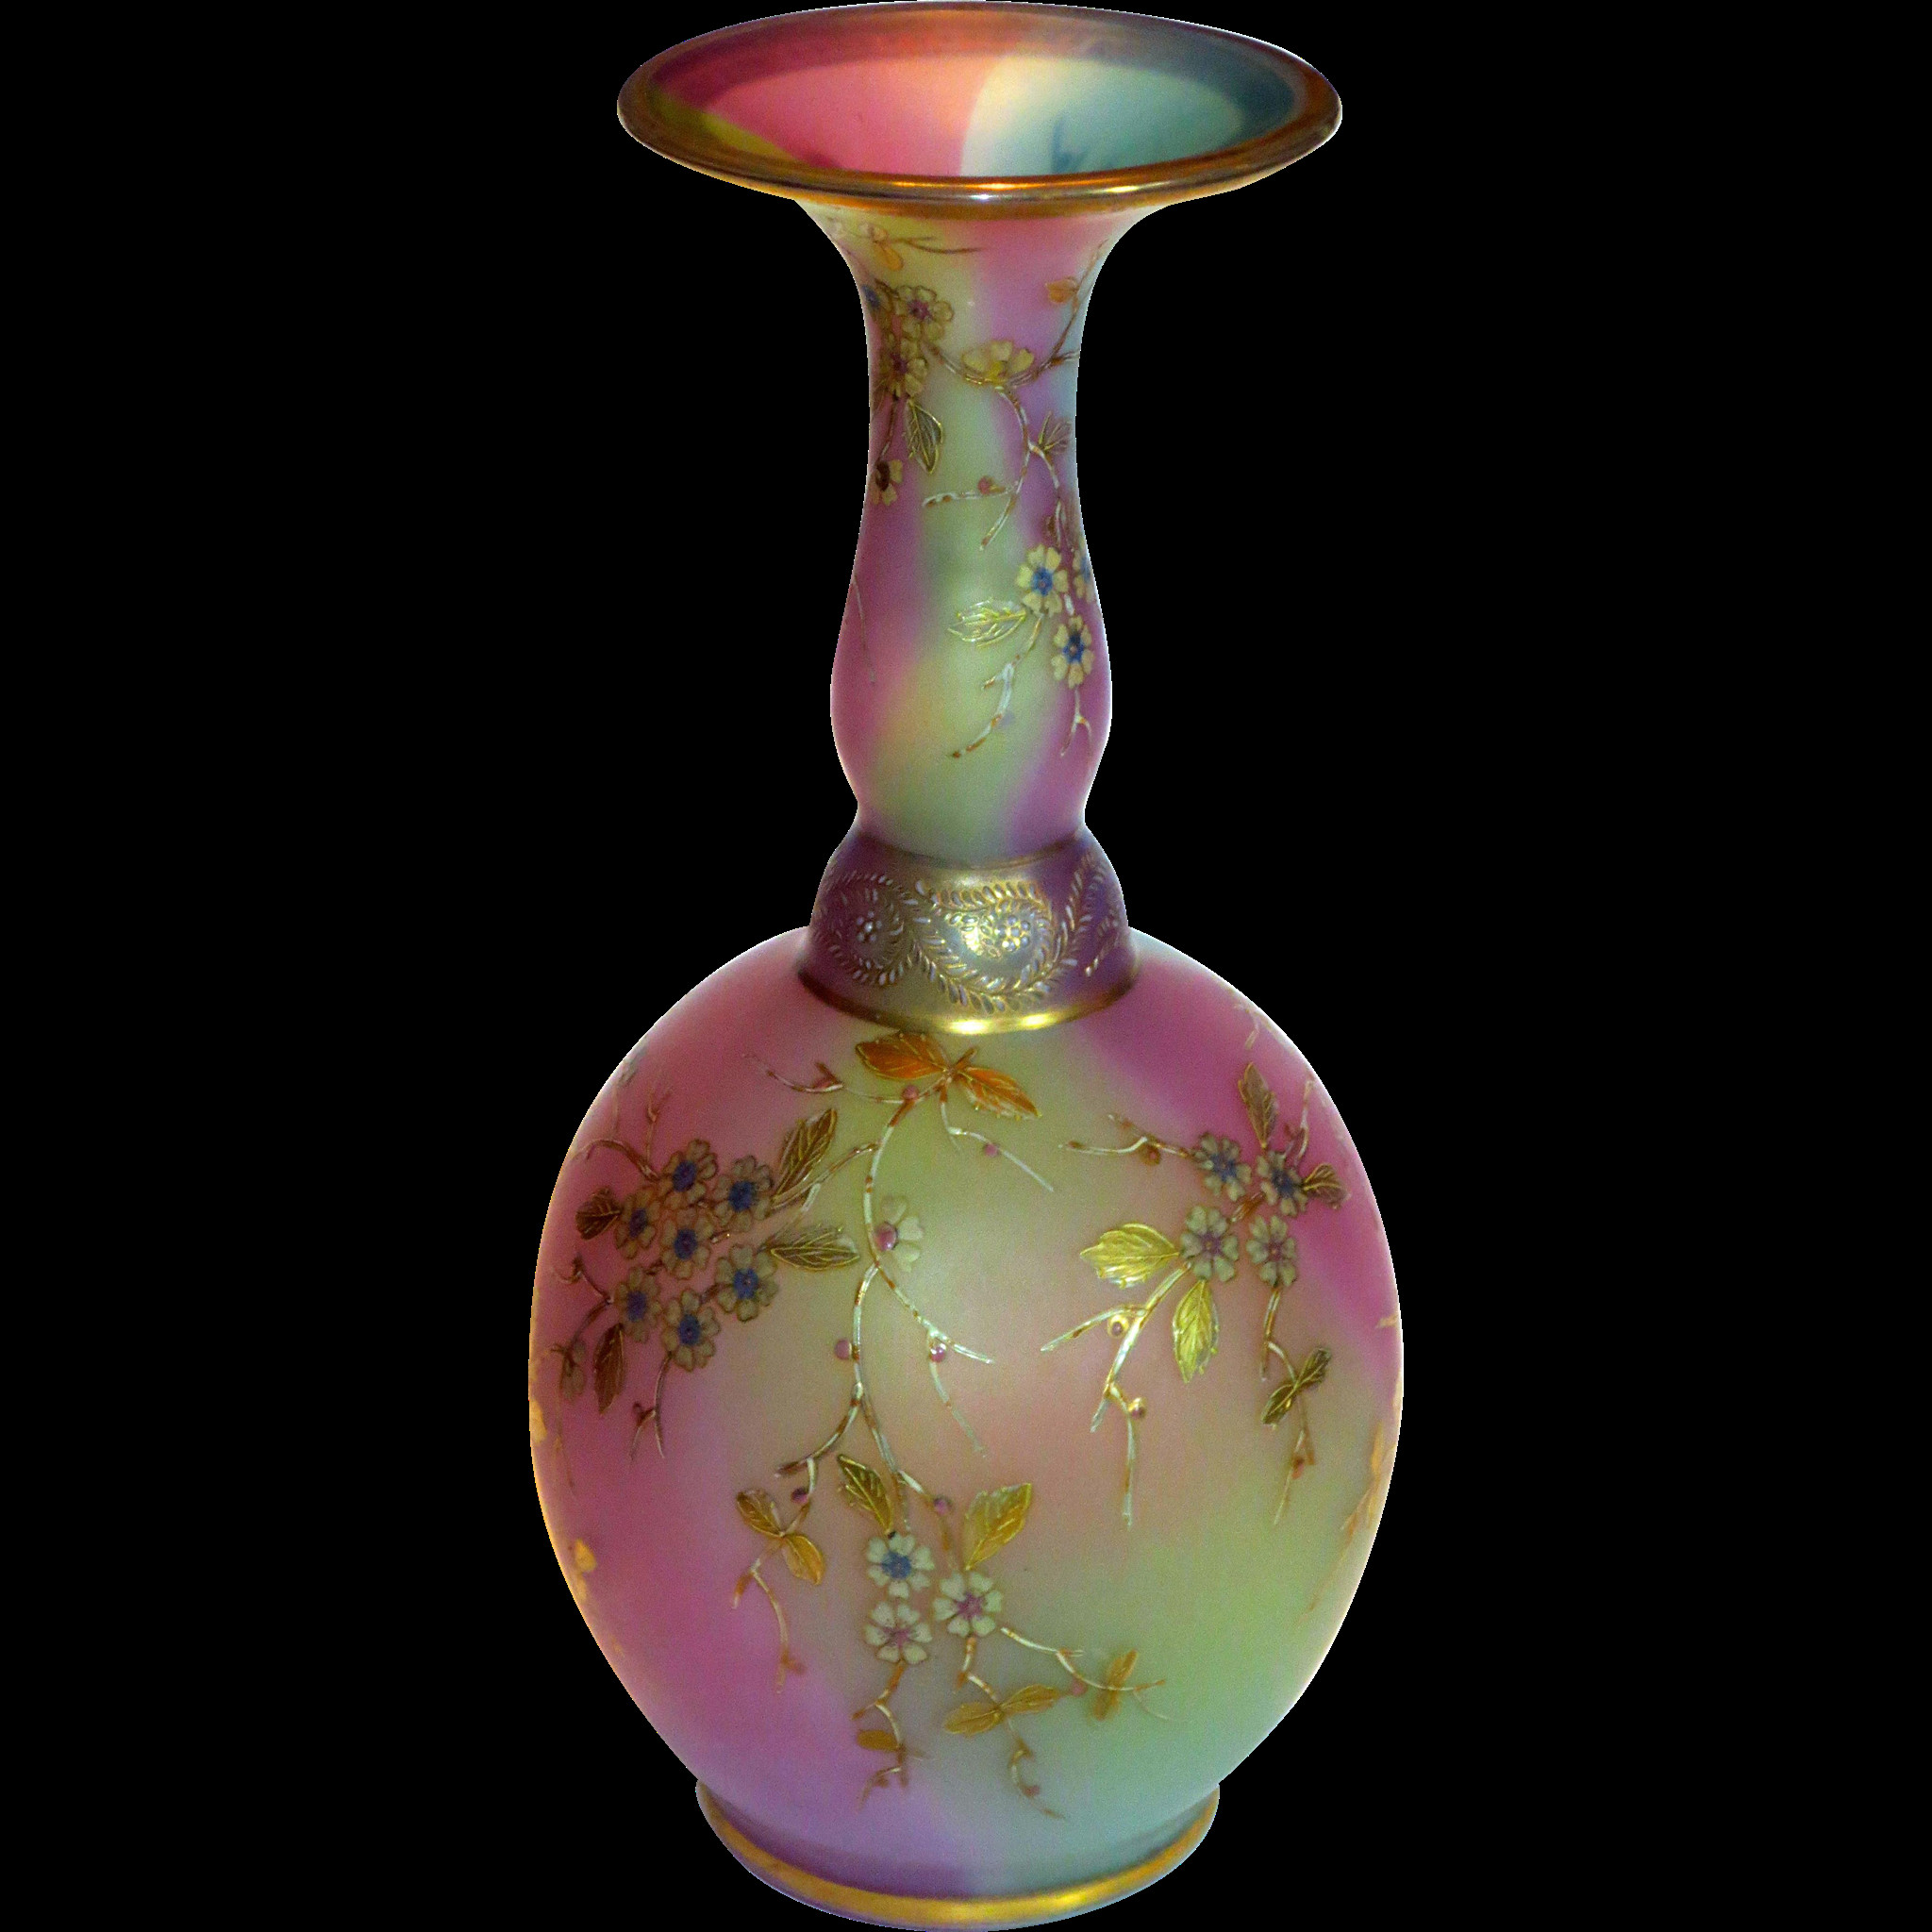 12 Wonderful Large Heavy Glass Vase 2024 free download large heavy glass vase of superb large loetz rainbow satin glass vase w enameled florals with regard to superb large loetz rainbow satin glass vase w enameled florals